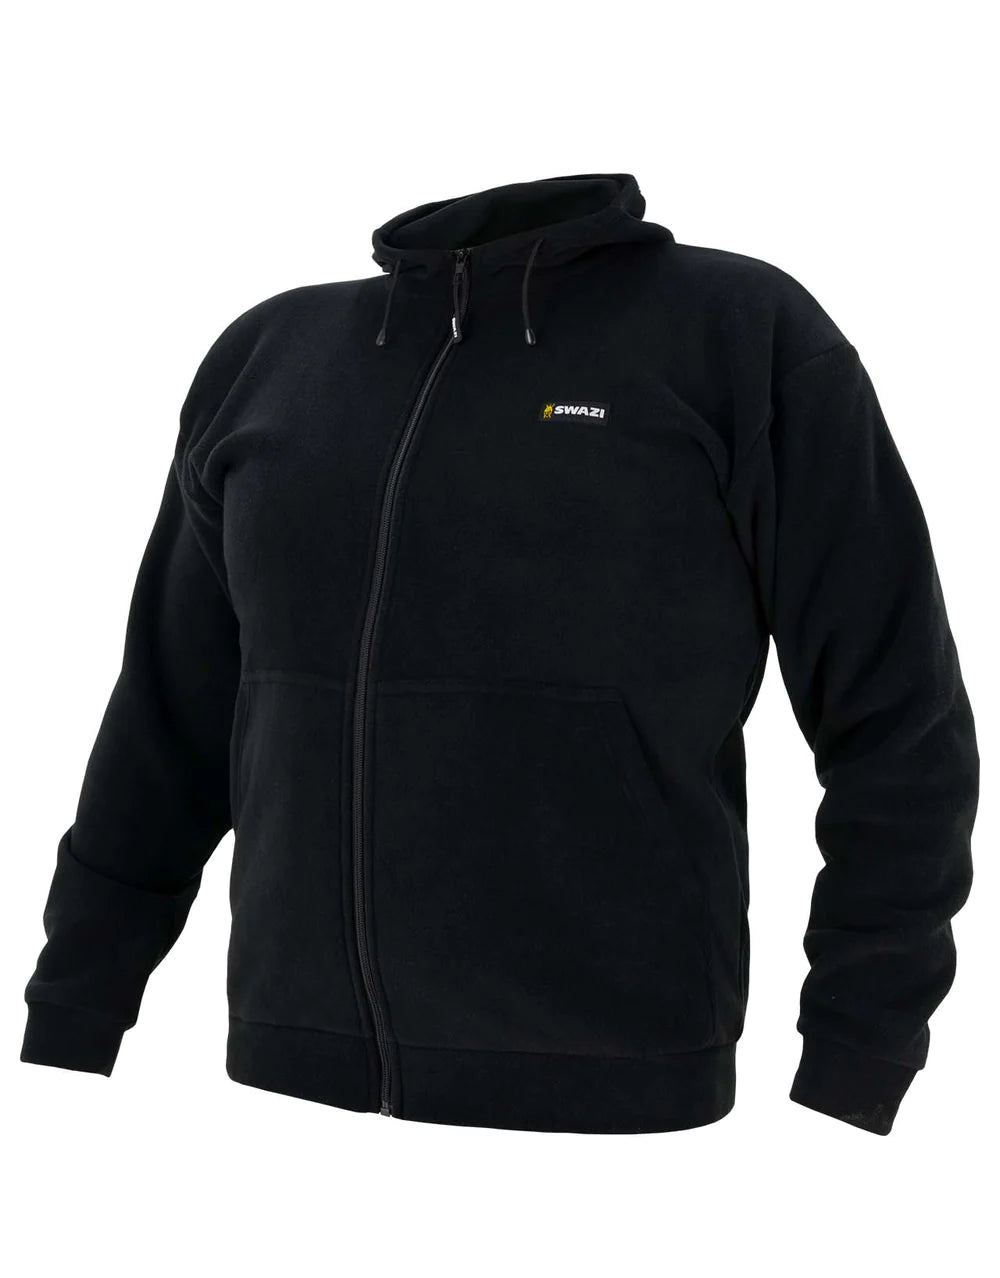 Swazi Hooded Rattler Jacket - XS / BLACK - Mansfield Hunting & Fishing - Products to prepare for Corona Virus